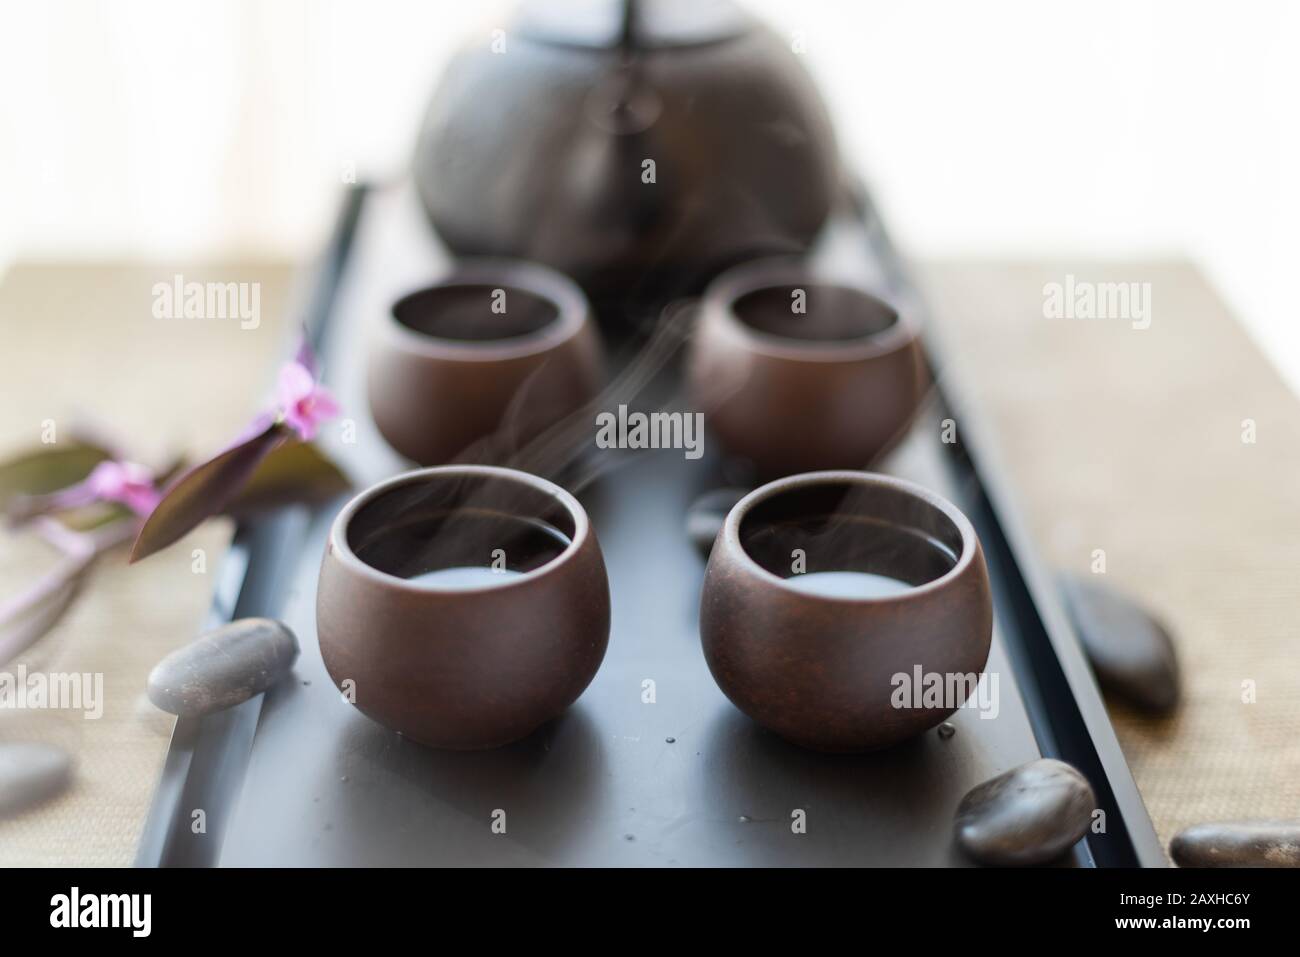 Traditional Chinese tea Set up with ceramic tea cups Stock Photo